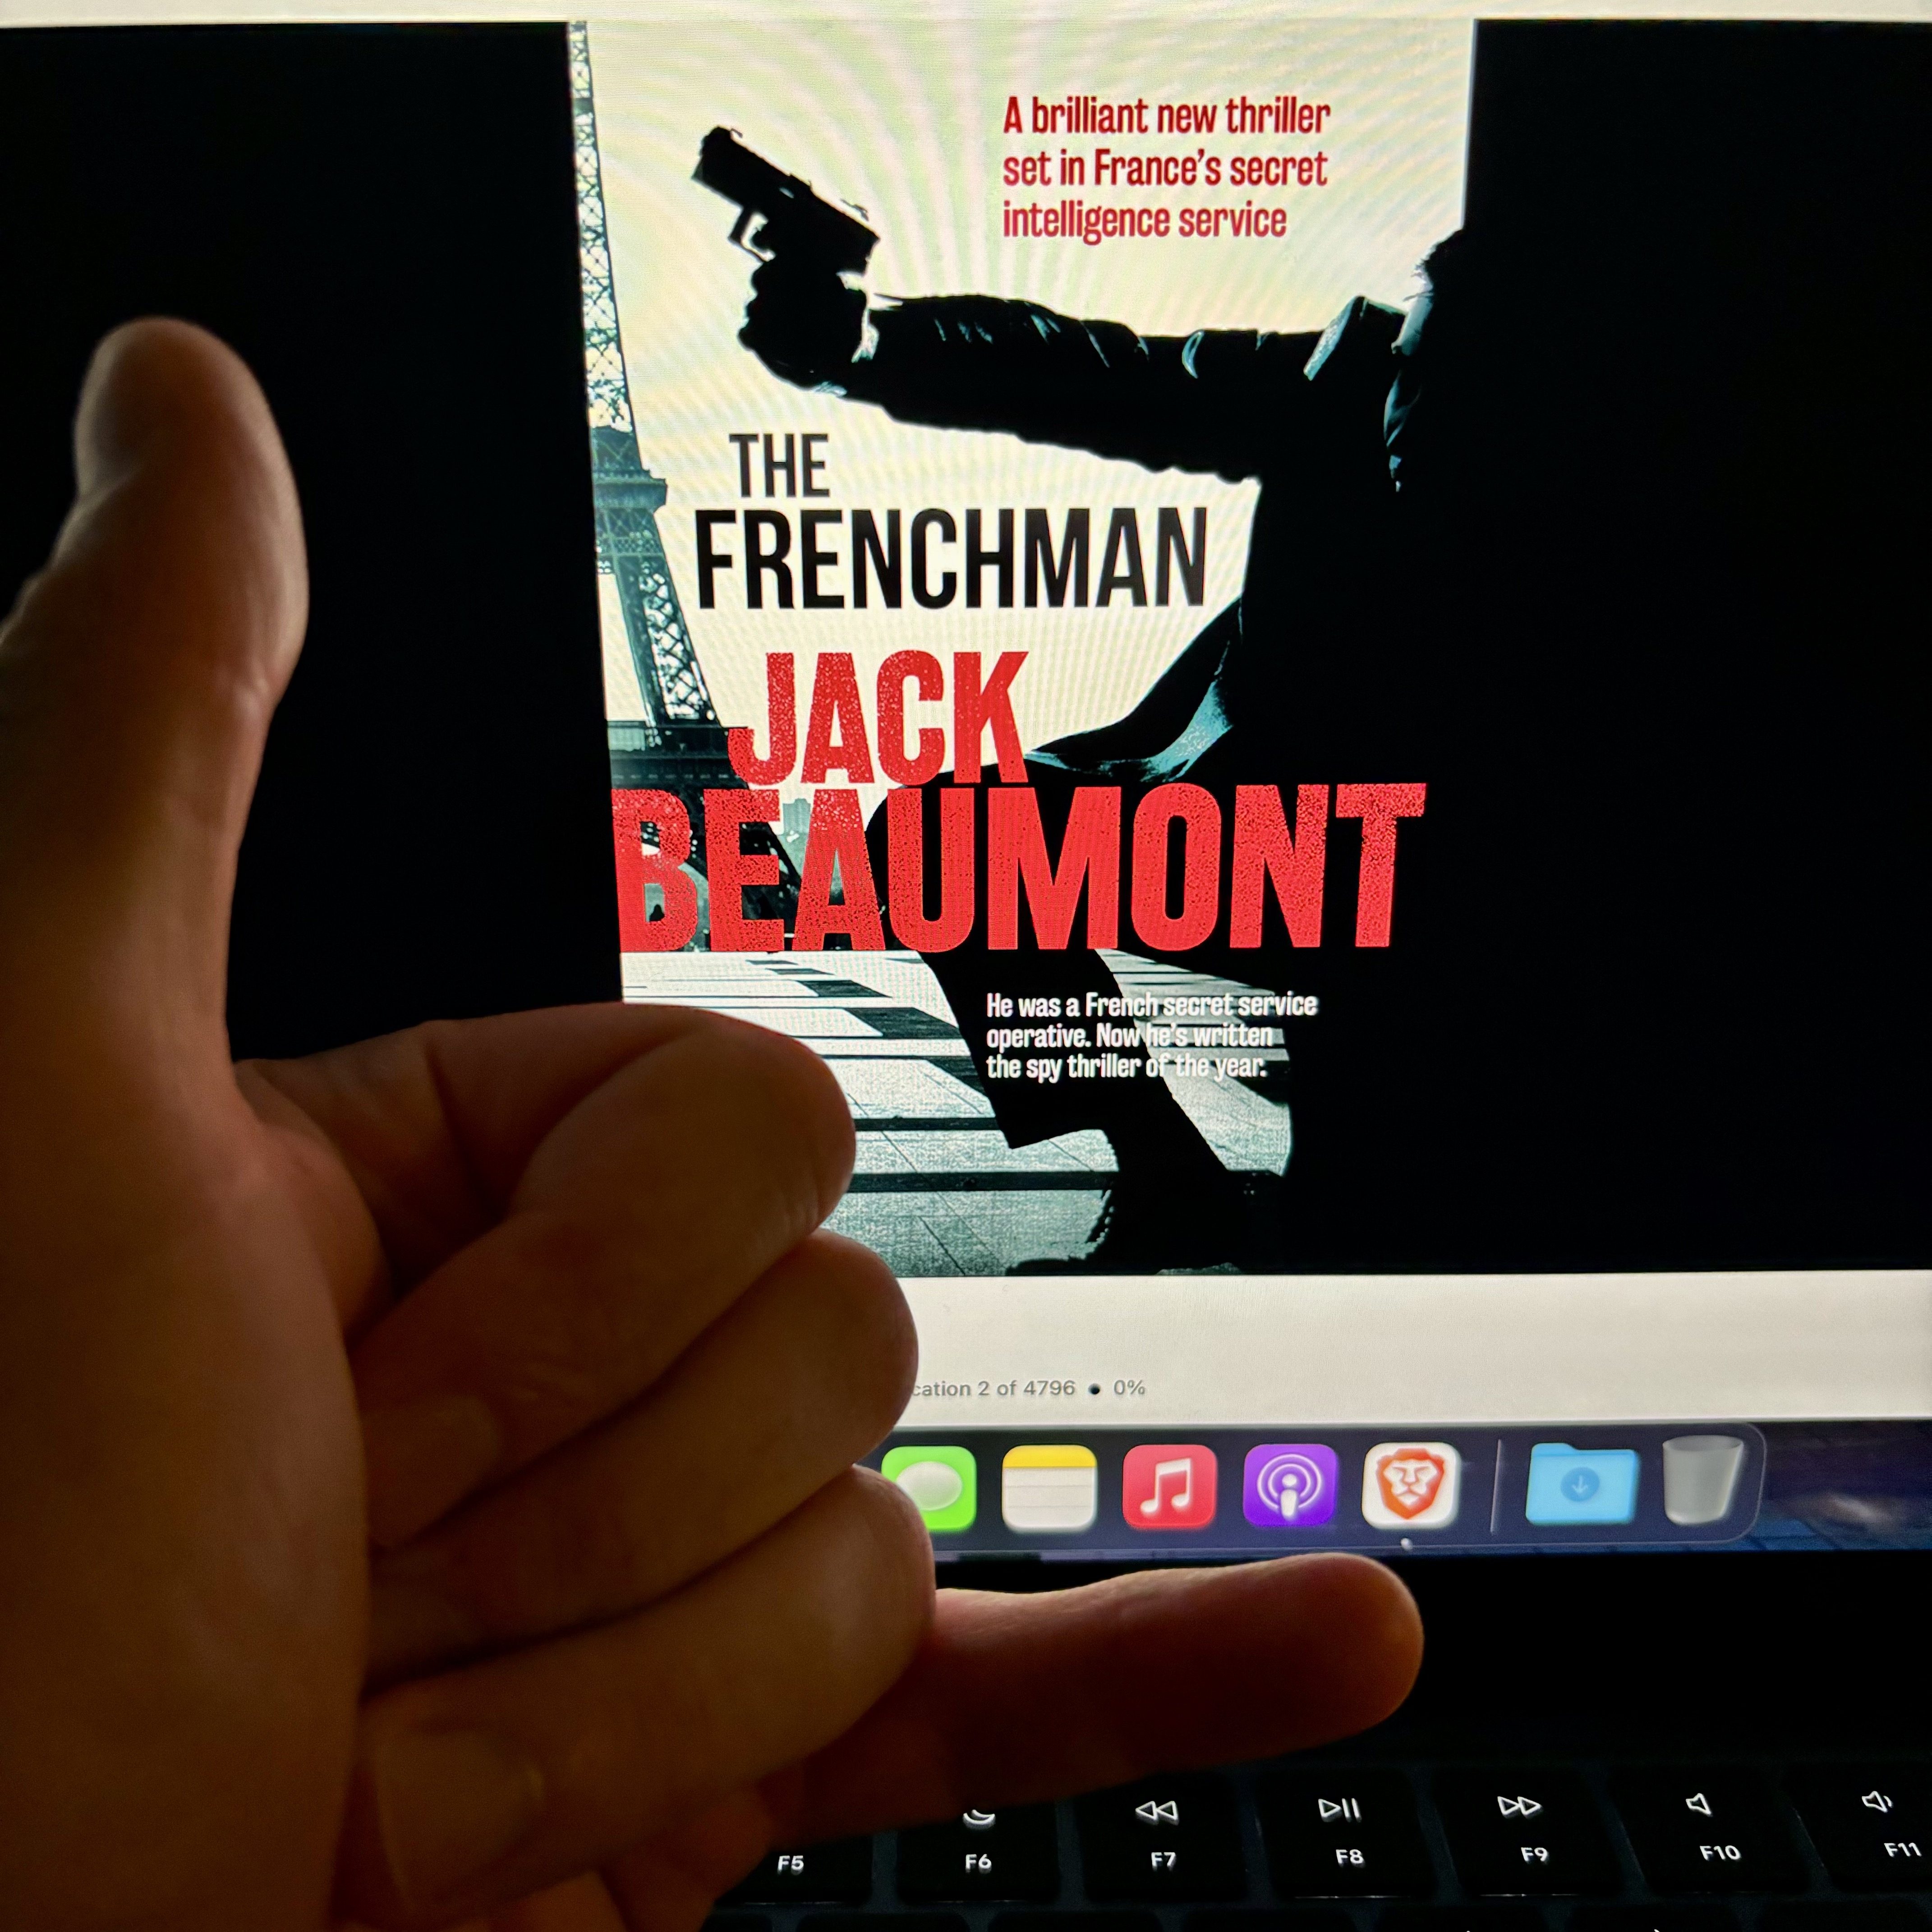 Jack Beaumont, The Frenchman